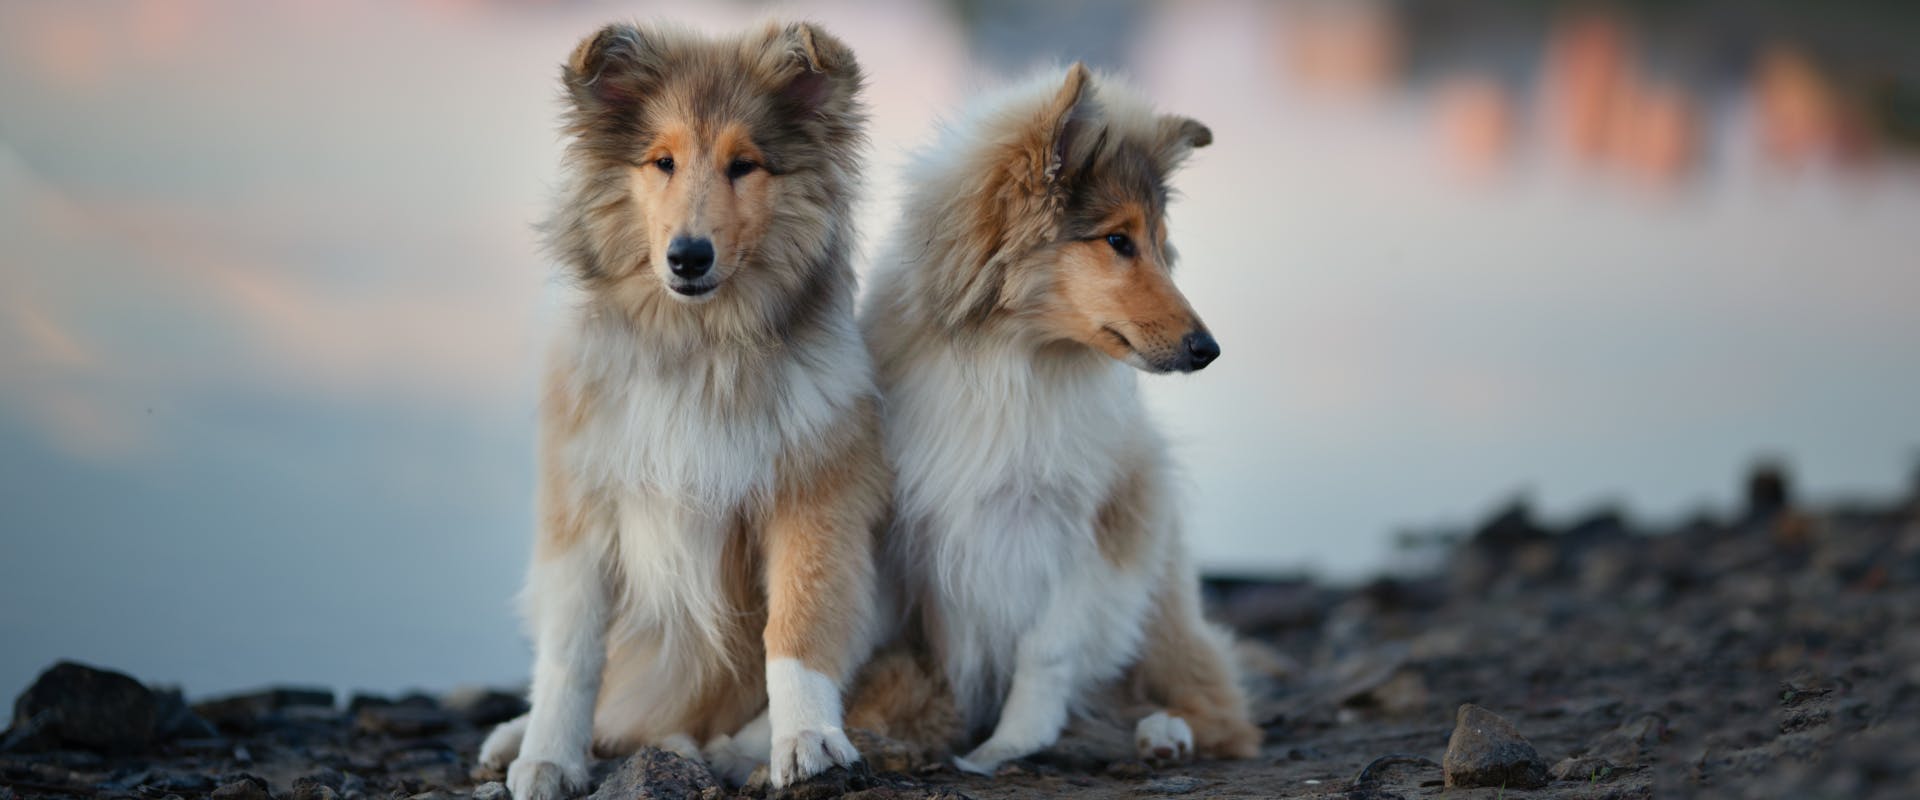 two long haired rough collie puppies sat next to each other on a rocky lake bank